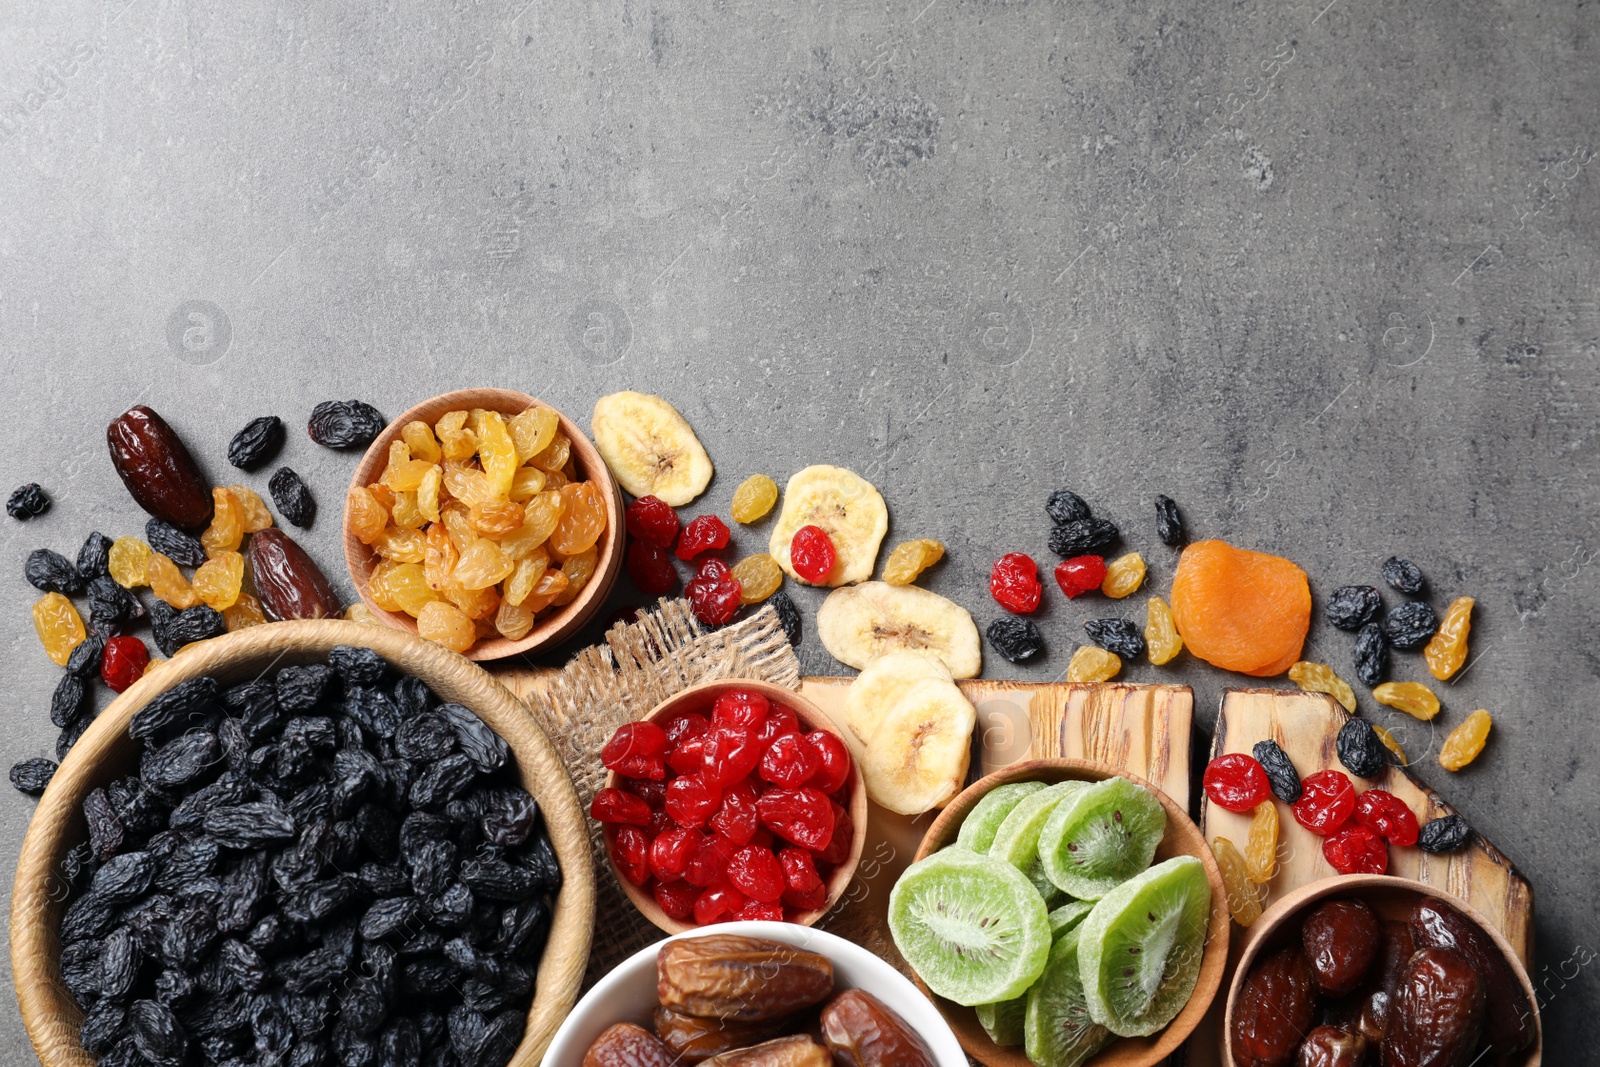 Photo of Bowls of different dried fruits on grey background, top view with space for text. Healthy food